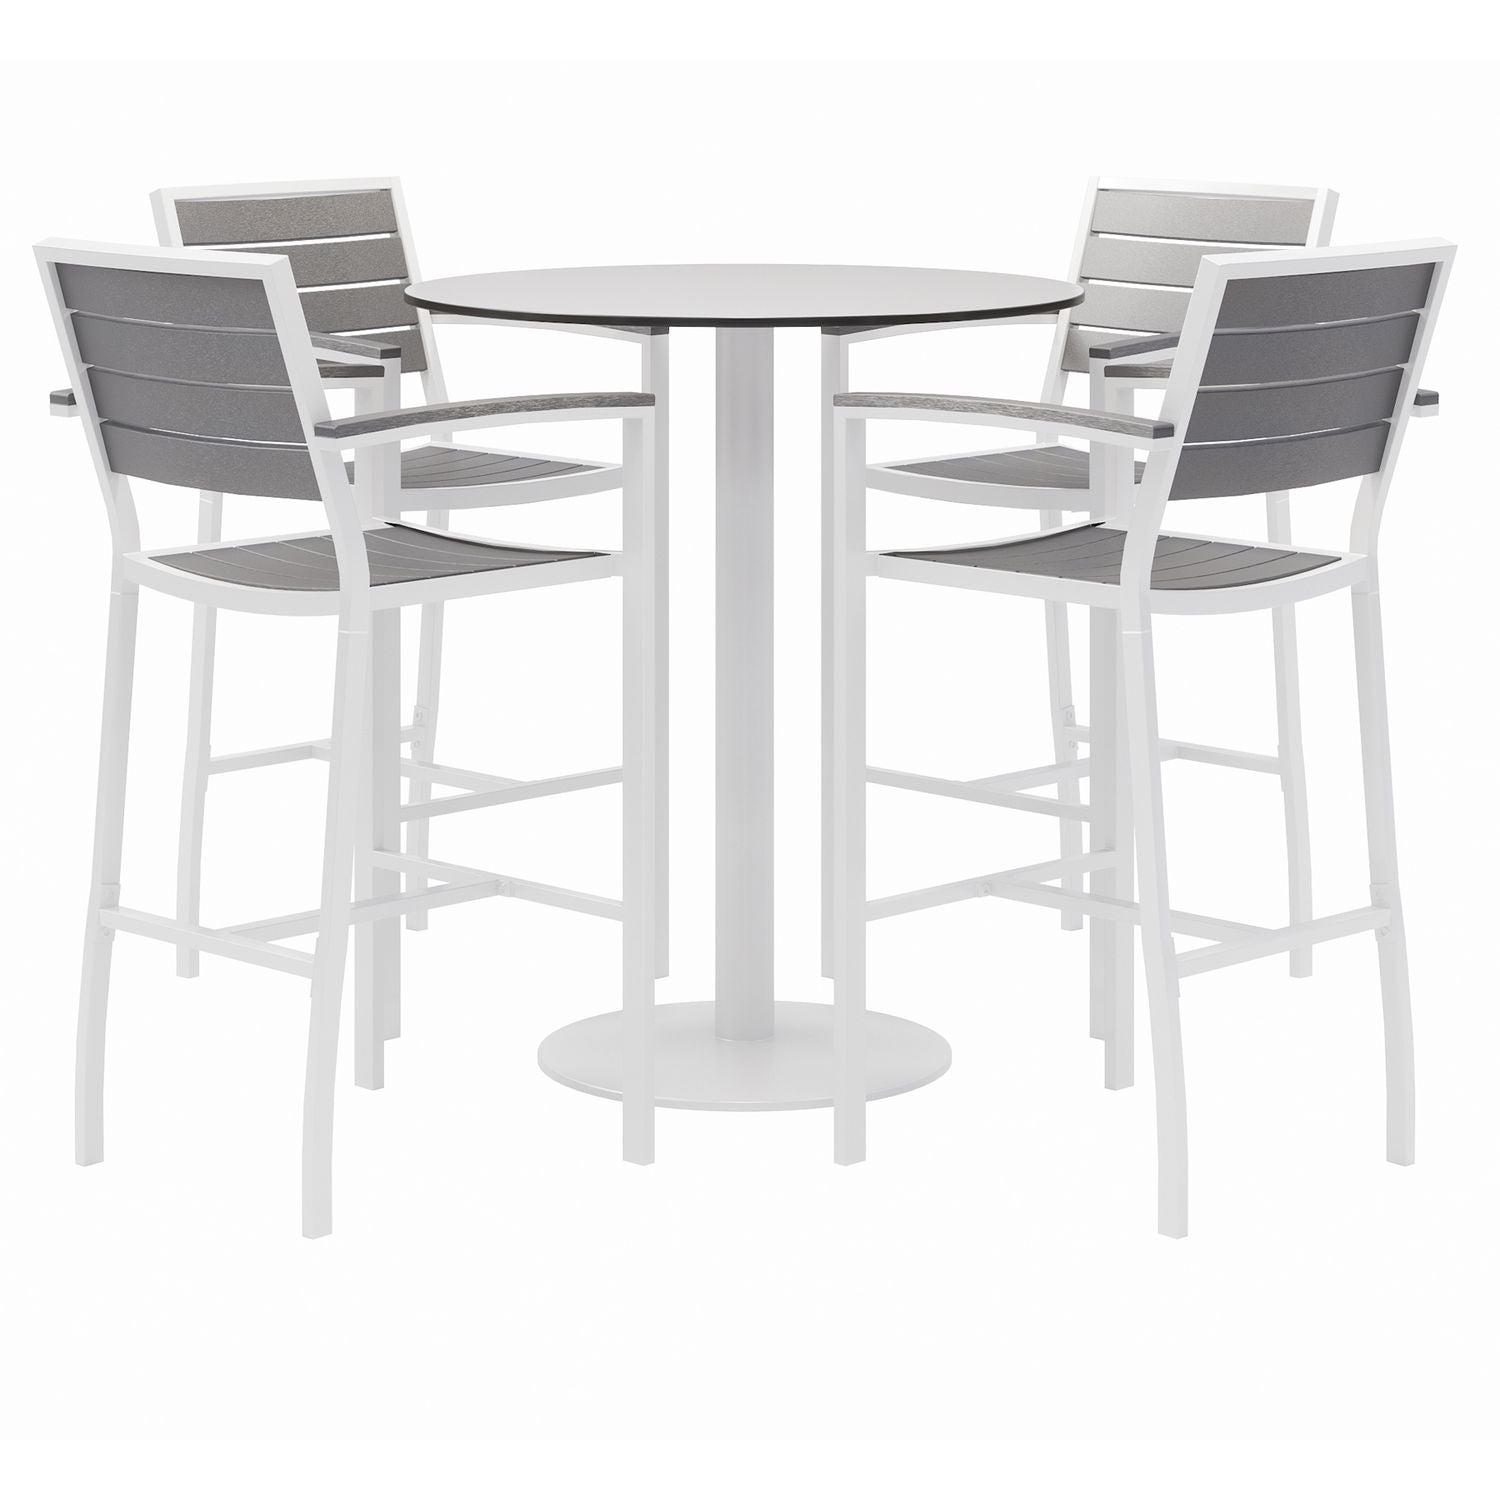 eveleen-outdoor-bistro-patio-table-w-four-gray-powder-coated-polymer-barstools-round-41h-white-ships-in-4-6-bus-days_kfi840031918512 - 1